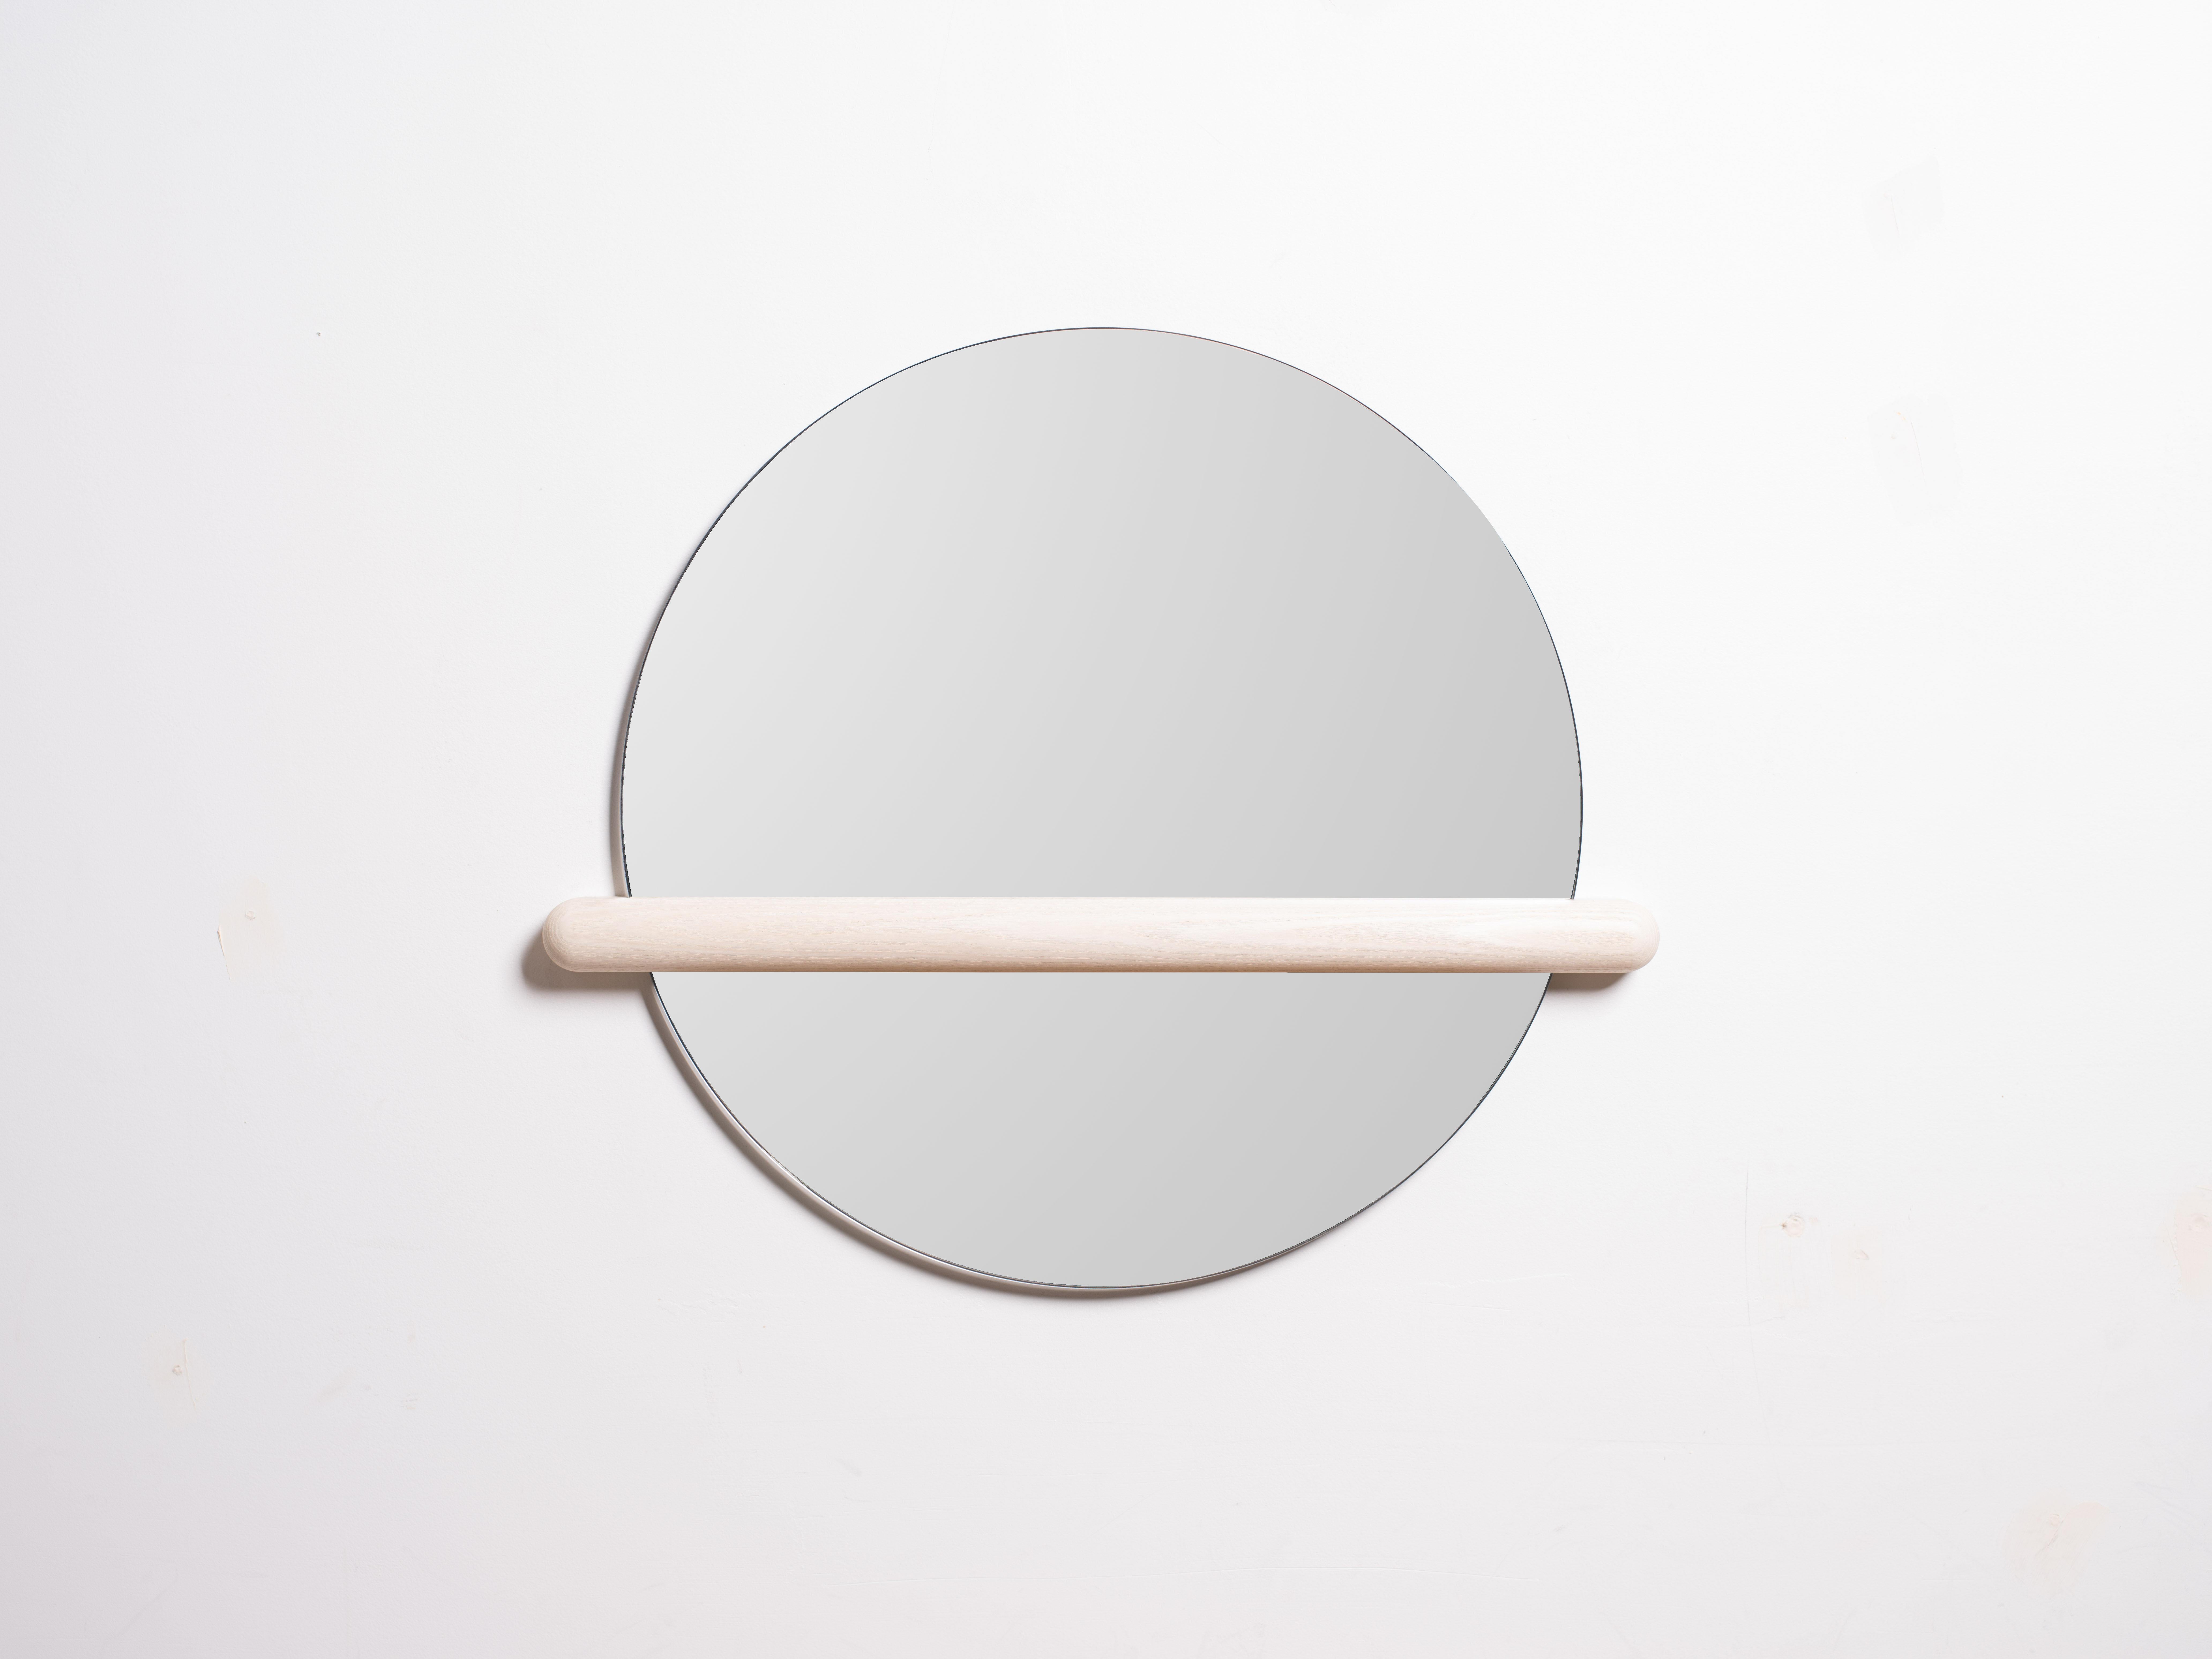 Mirrors are for reflecting but sometimes it's best we don't see the whole picture. Censor mirror intentionally obstructs your reflection to have a new perspective on your image. Easily mounted to the wall with two screws. Mirror slips in and out the